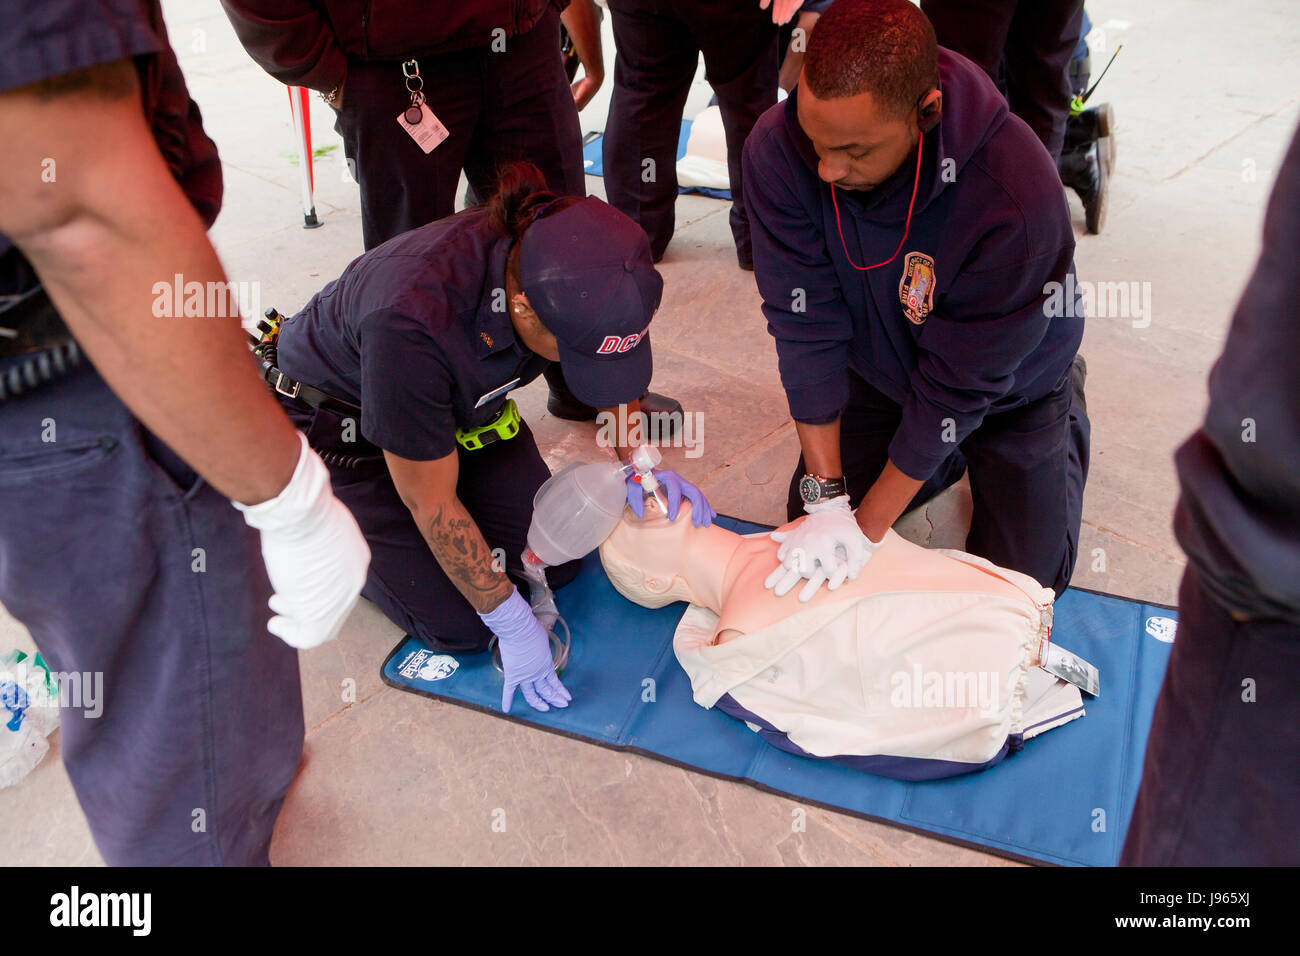 Fire and EMS technicians (EMT, Paramedic) performing CPR on CPR manikin (CPR training)  - Washington, DC USA Stock Photo